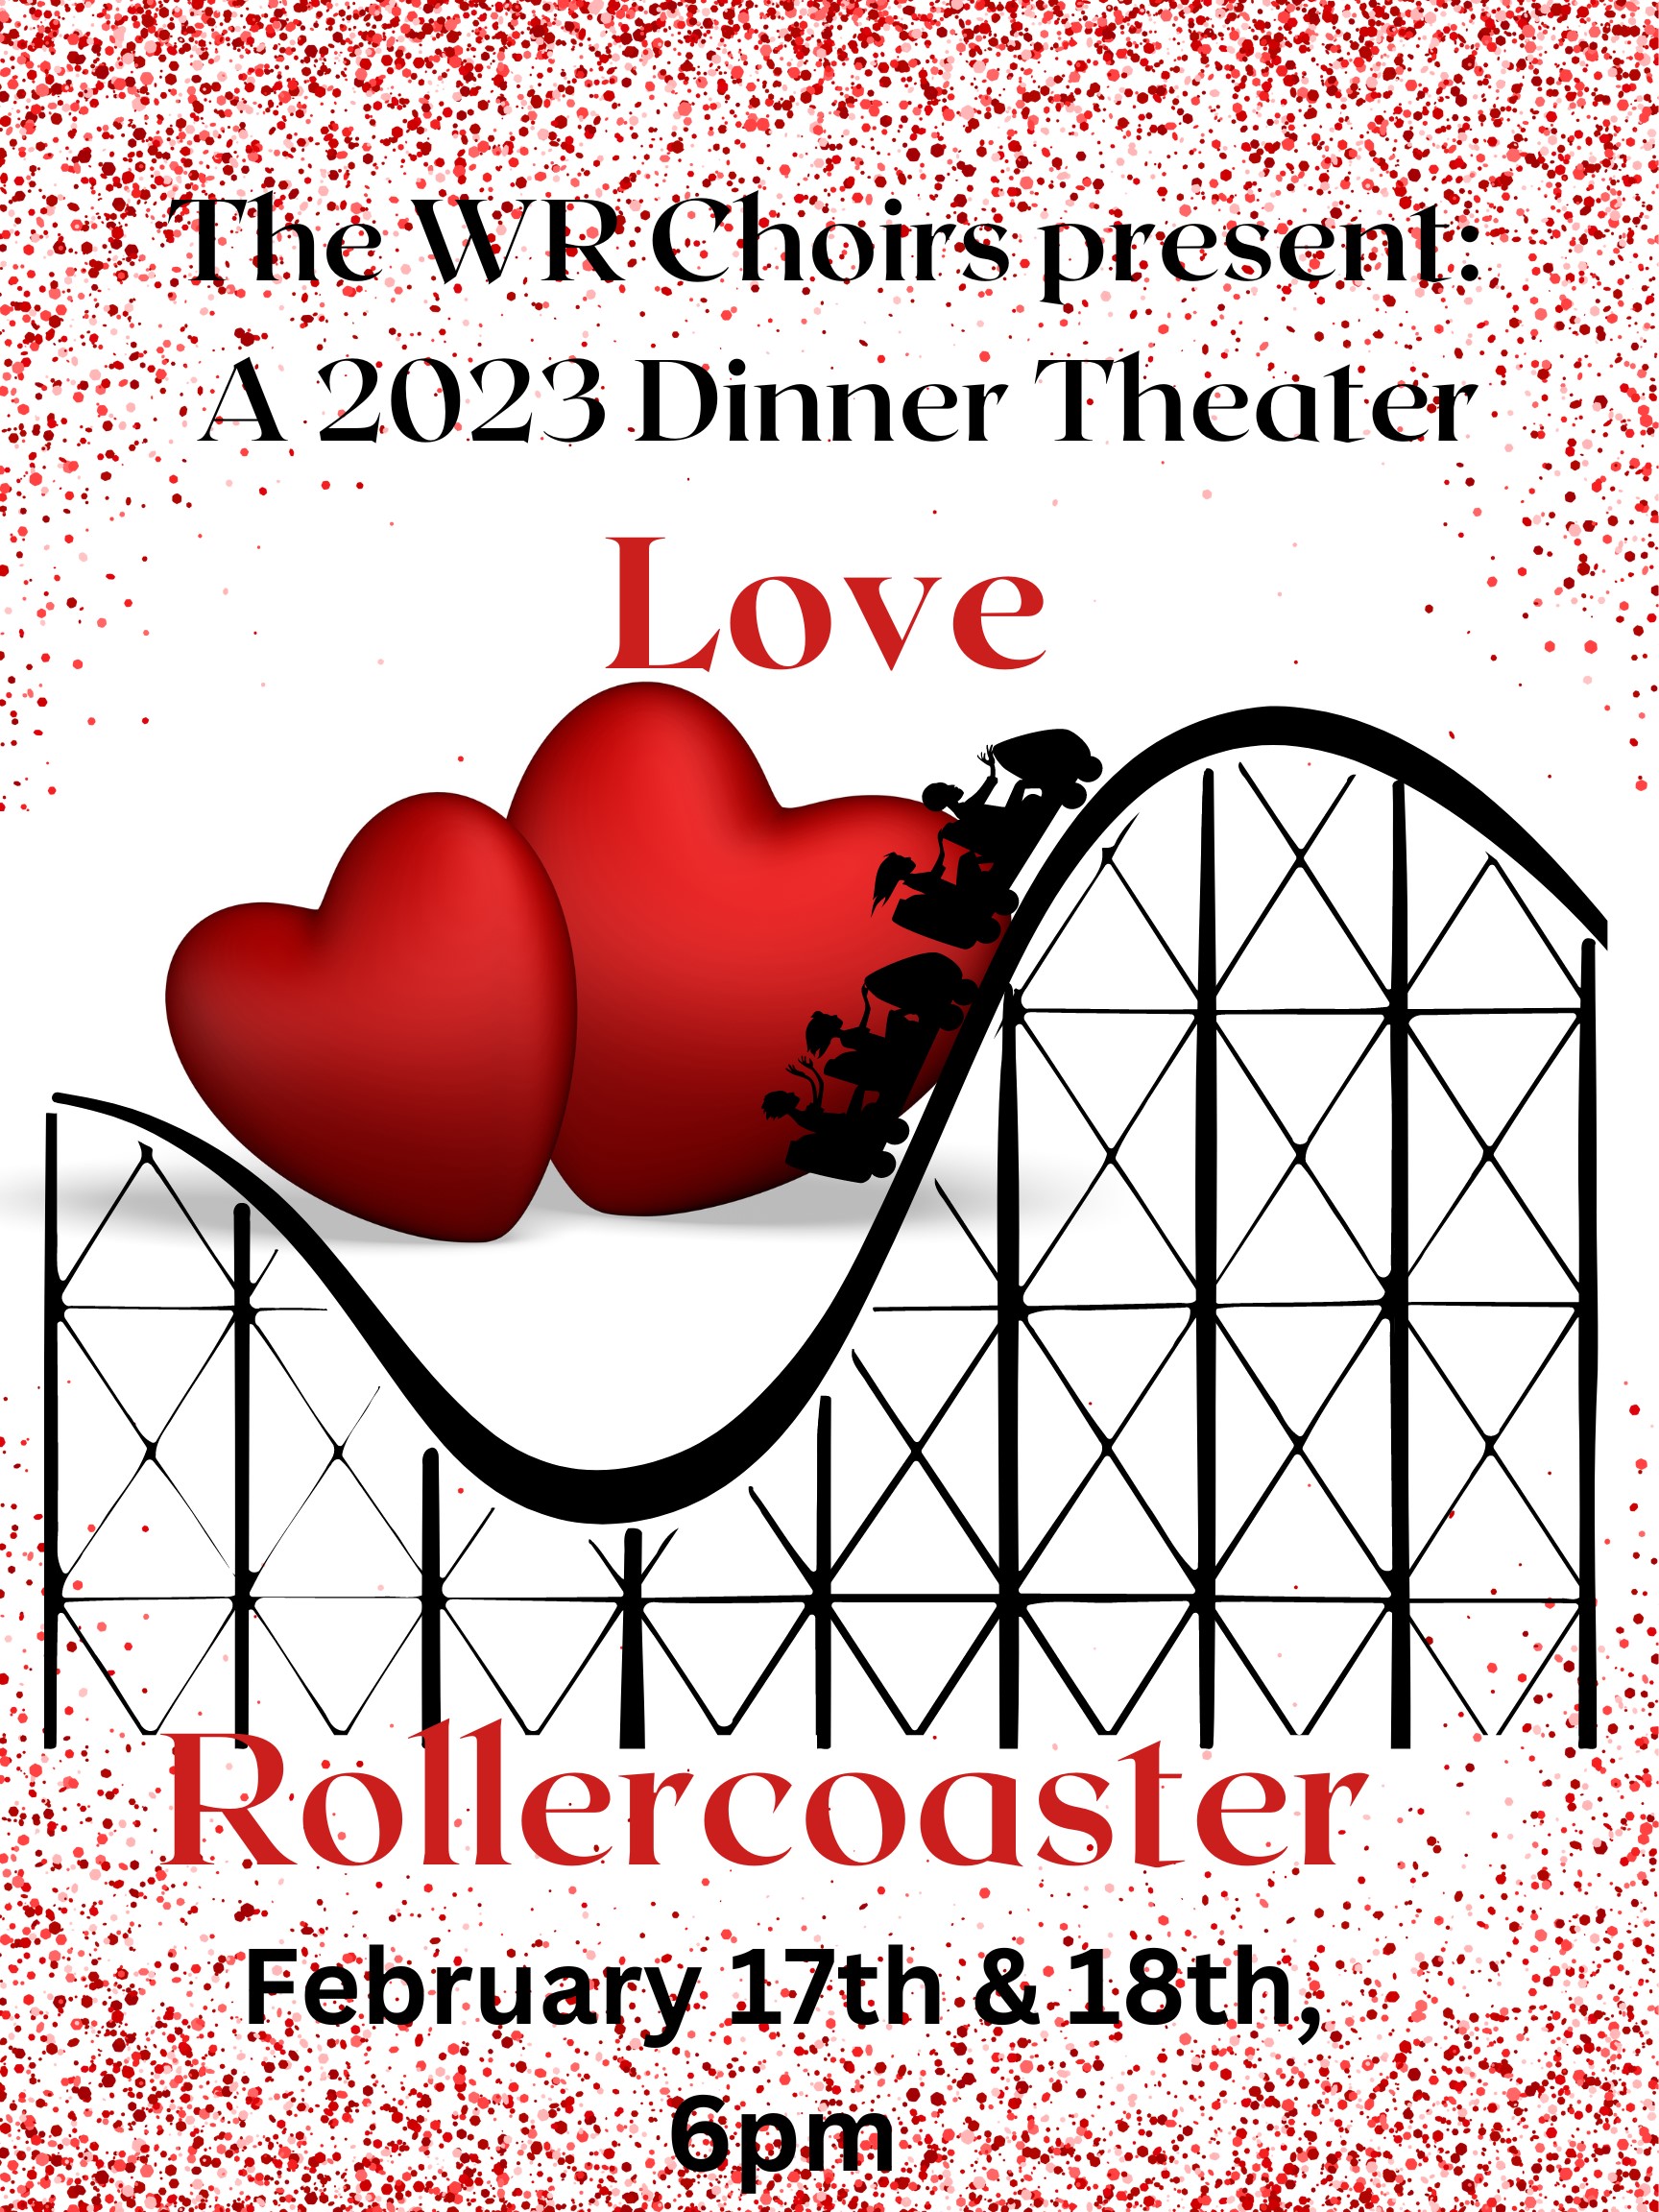 Front of dinner theater flyer